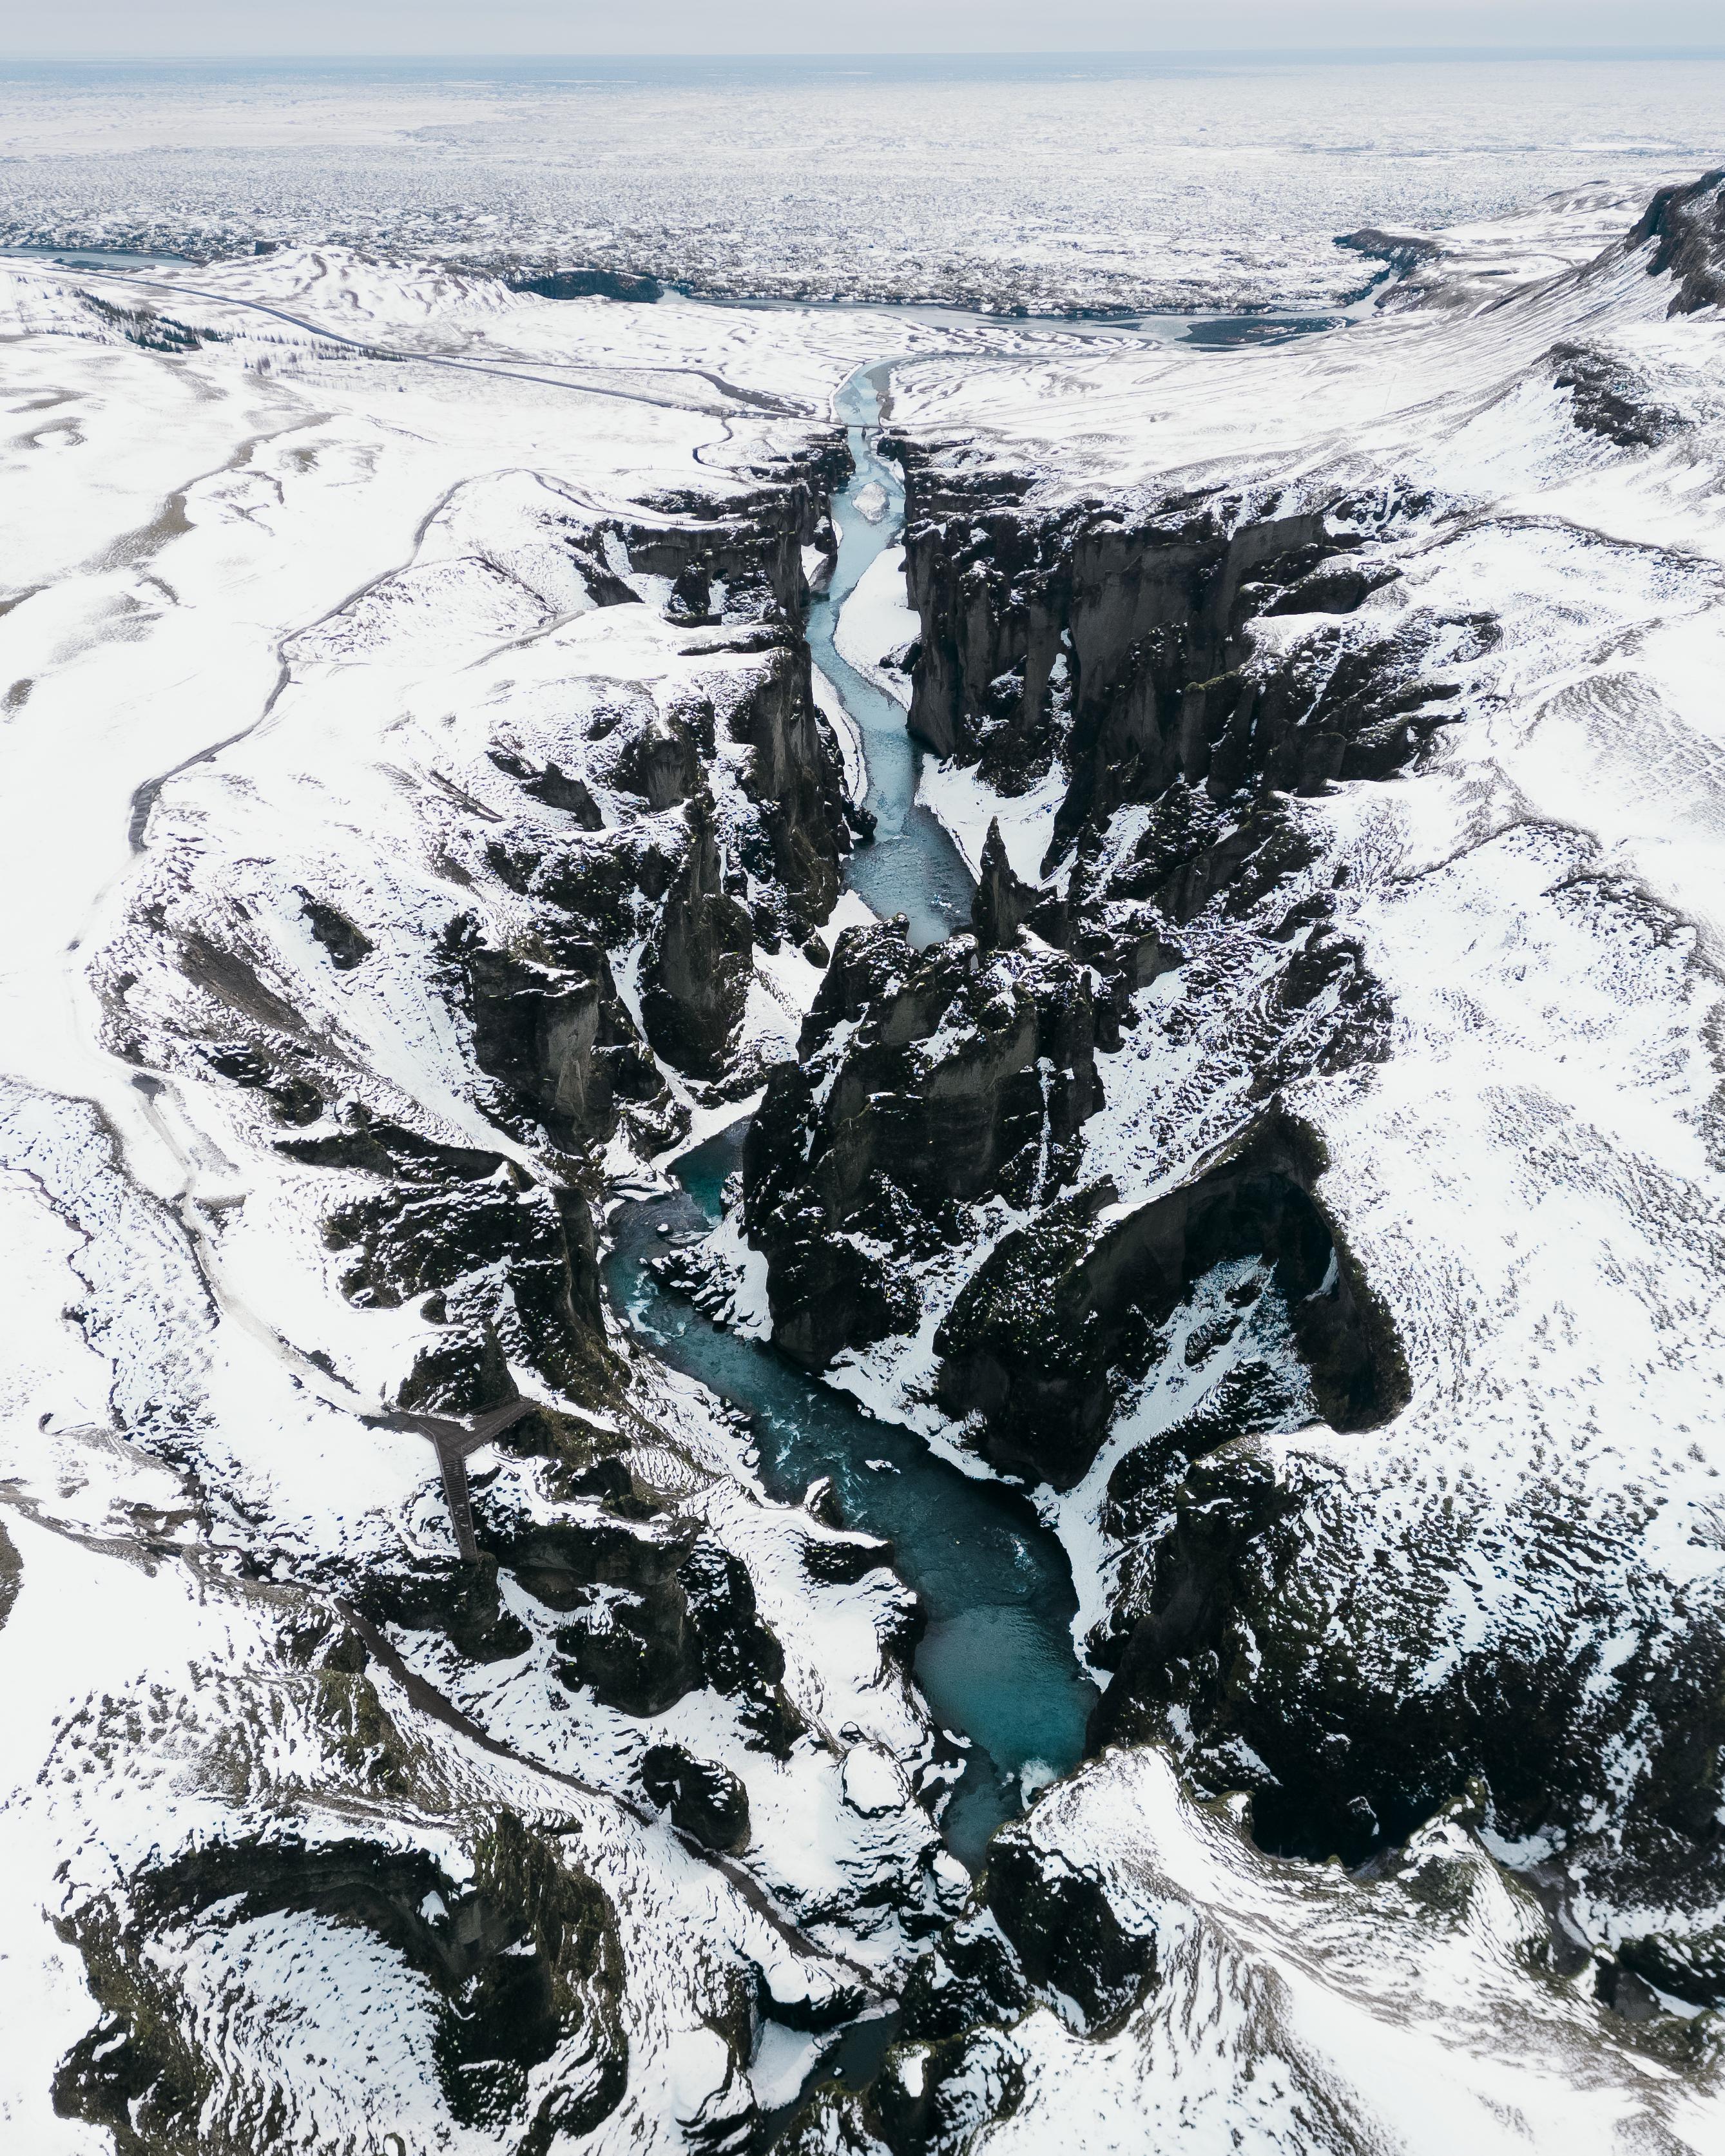 Snow Cliff Nature Landscape Iceland Europe River Canyon Mountains Aerial View 2677x3346